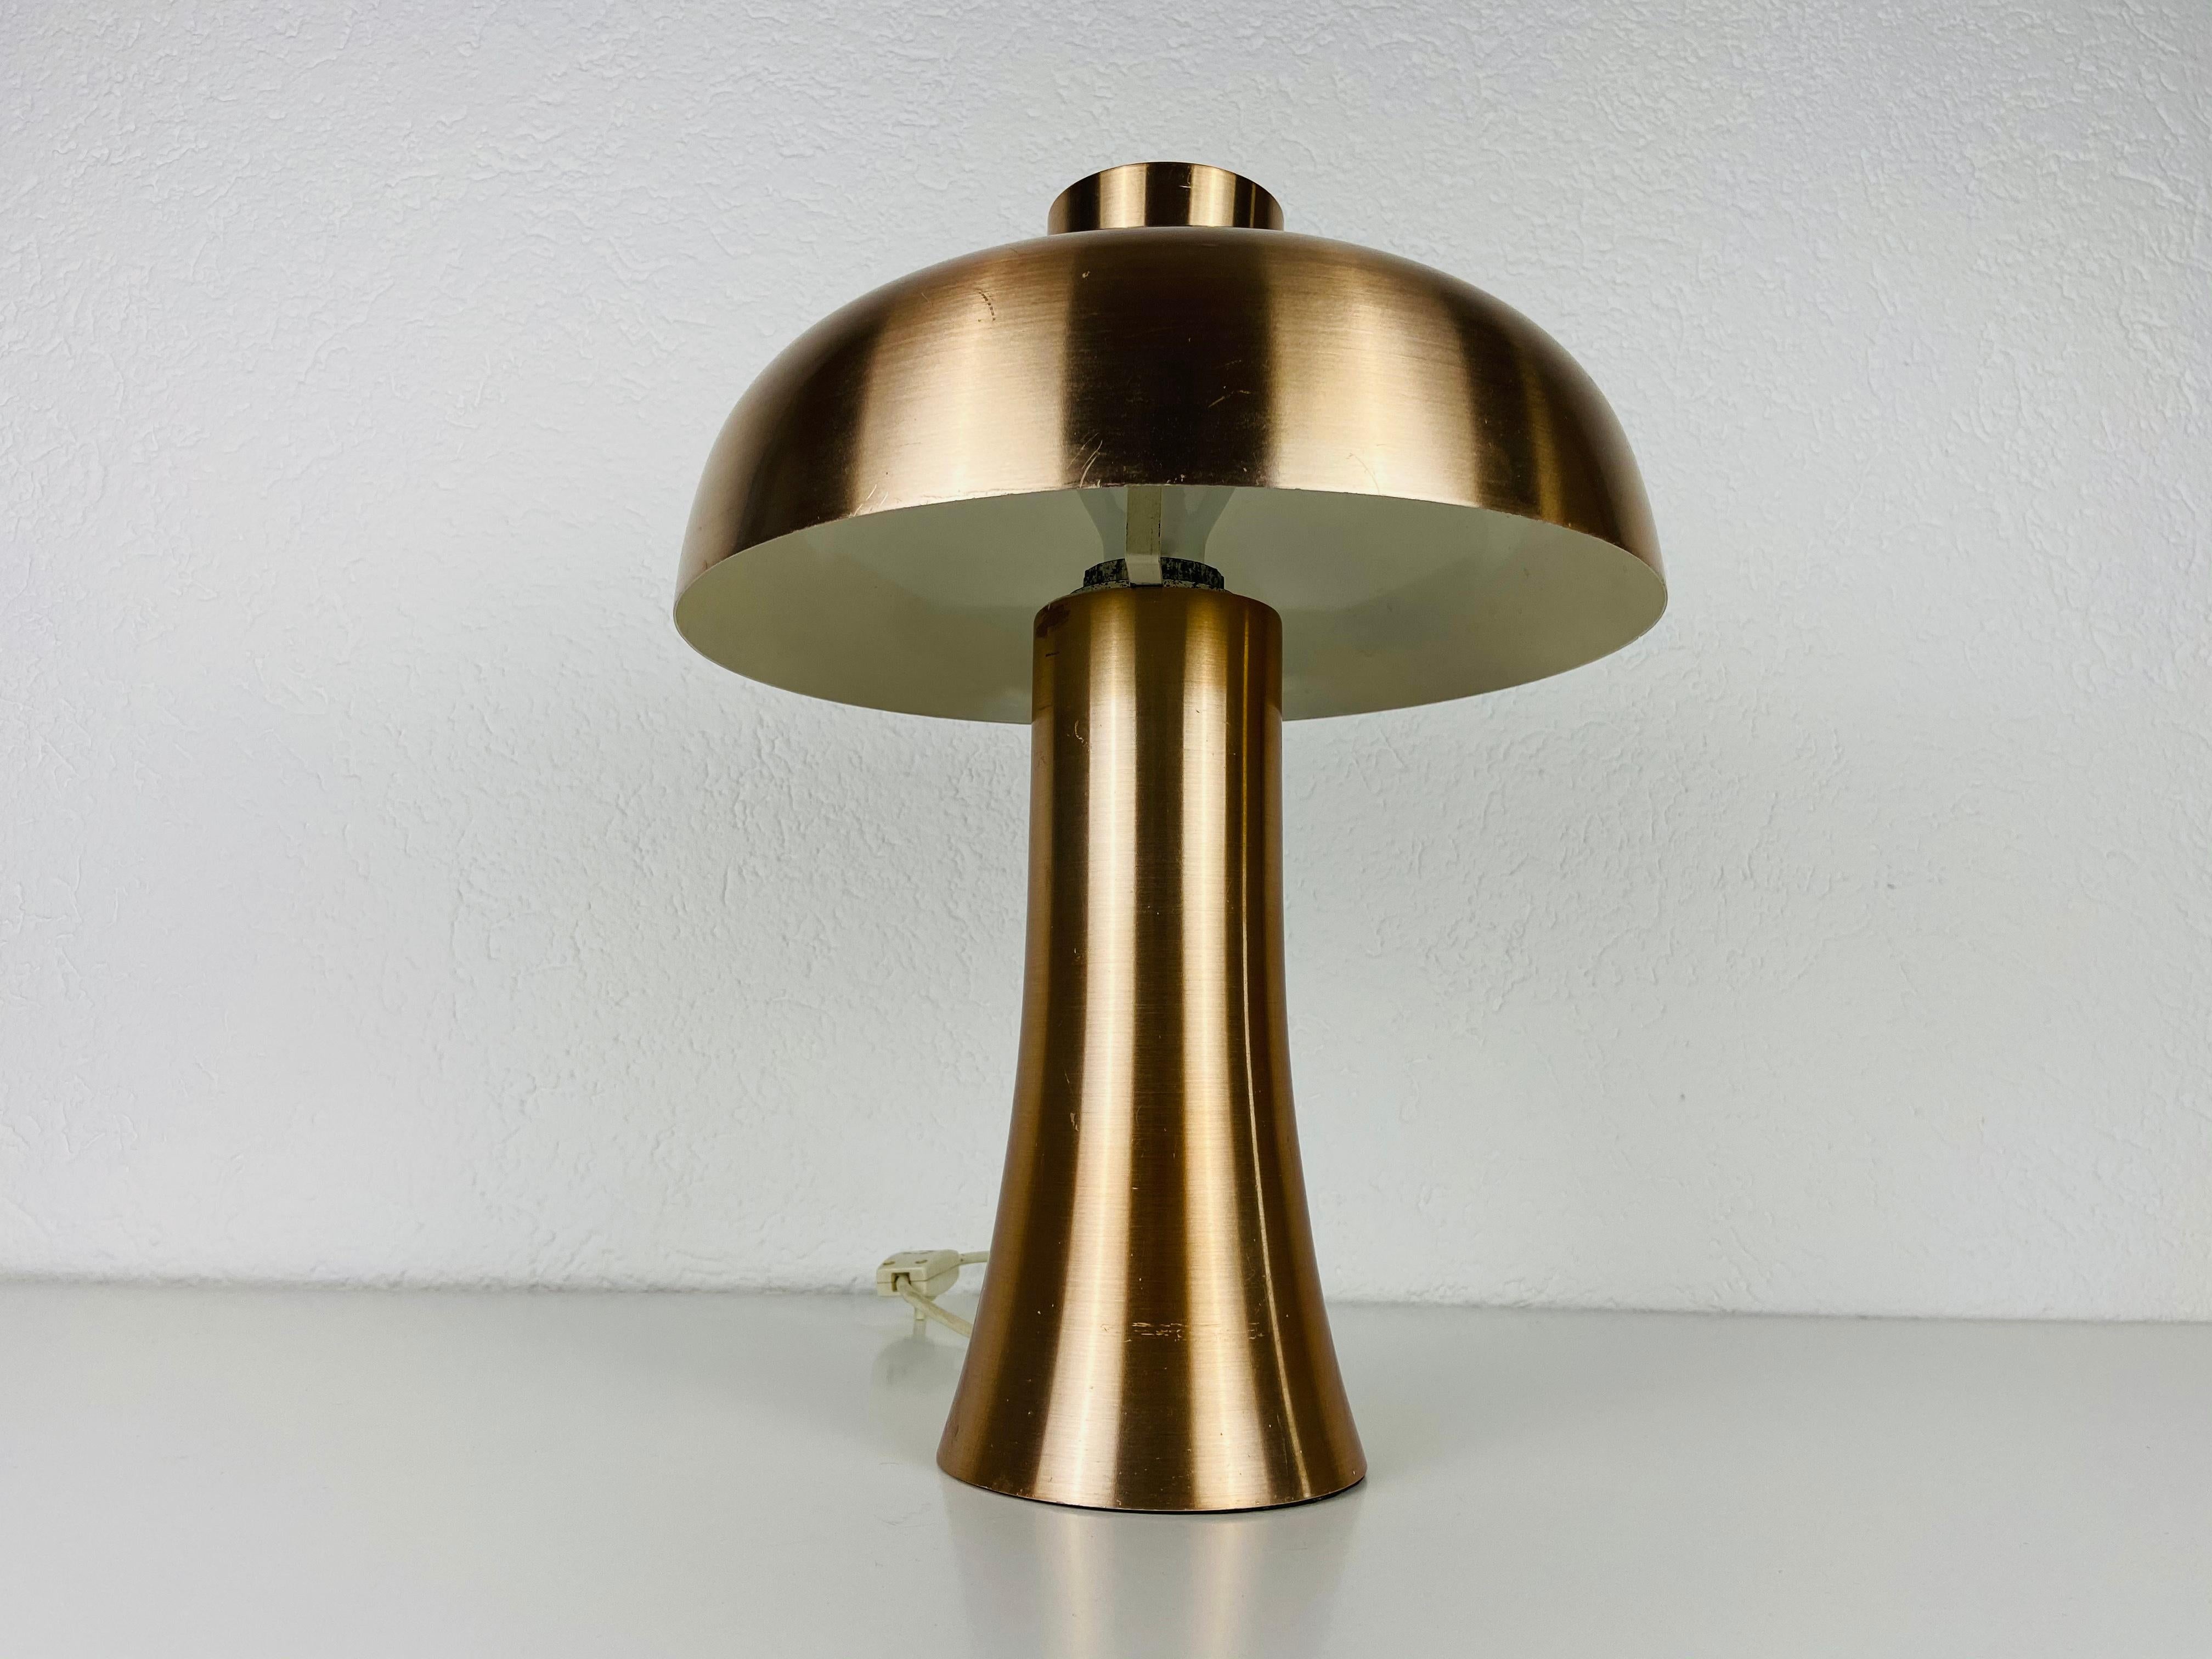 An Italian table lamp made in the 1960s. Made of thin aluminium. The lighting has an exceptional mushroom shaped design.

The light requires one E27 (US E26) light bulb. Works with both 120/220V. Good vintage condition.

Free worldwide express